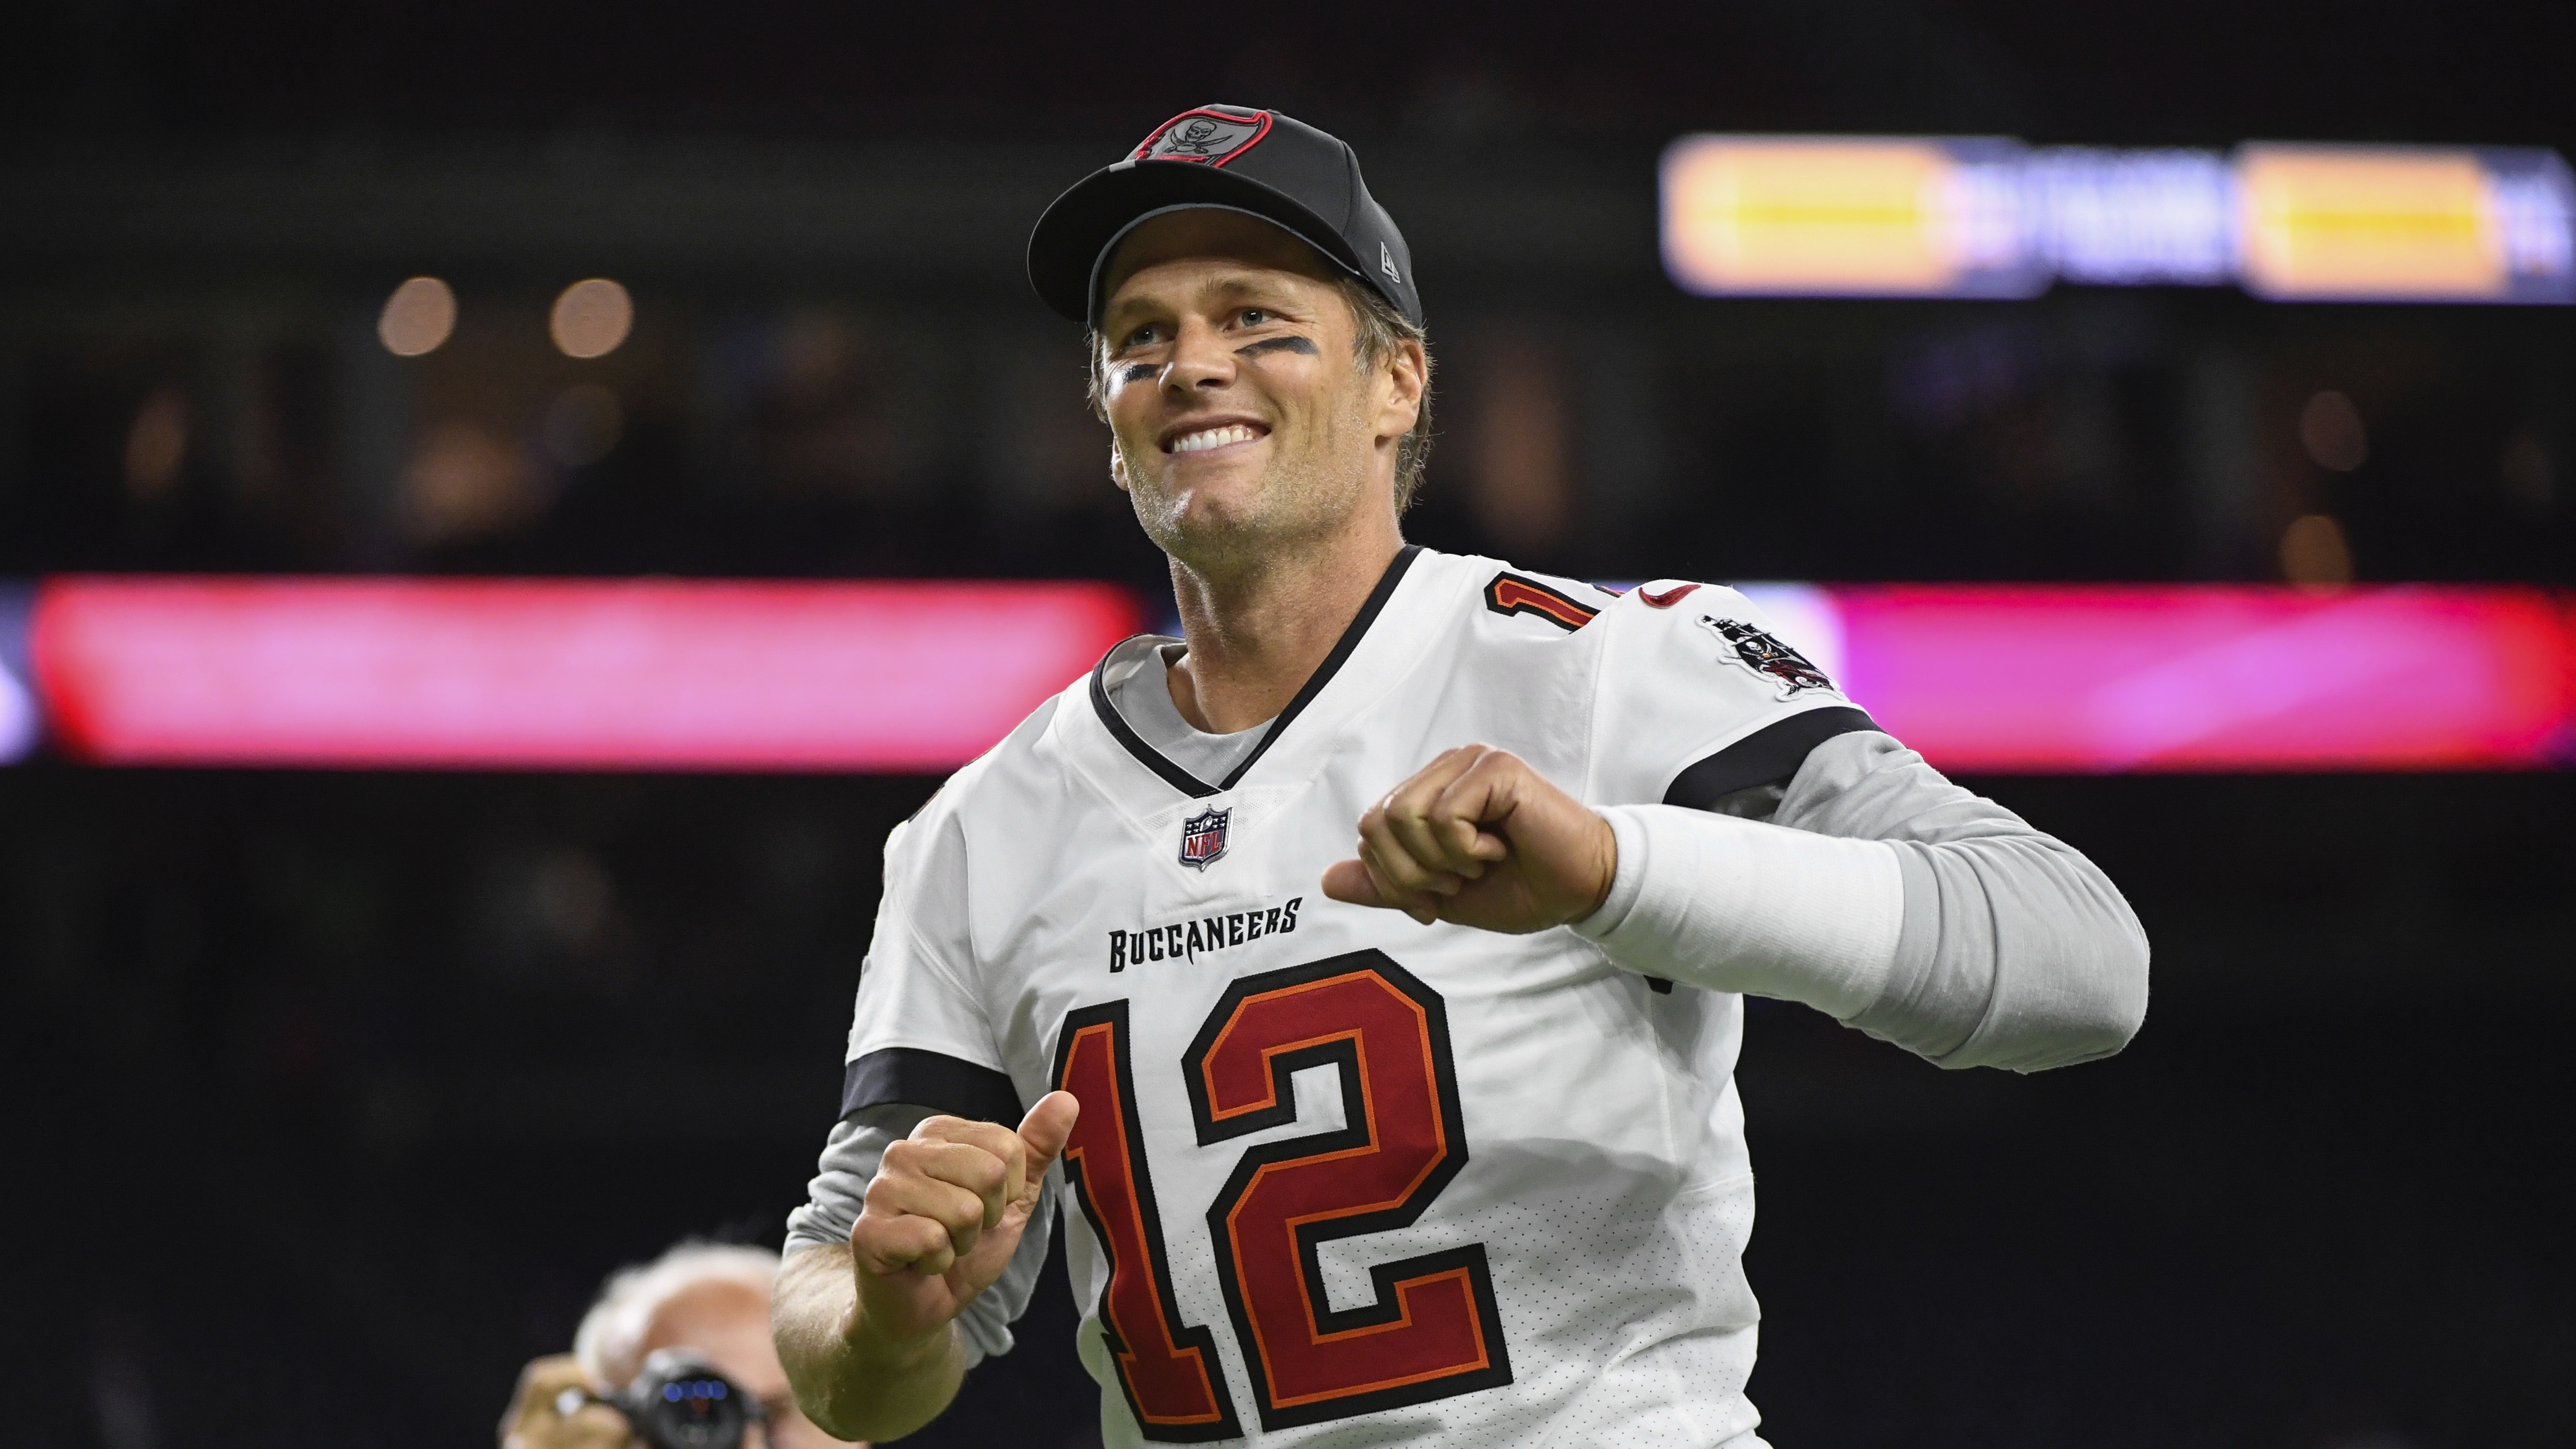 Latest On Tom Brady's Future With The Buccaneers